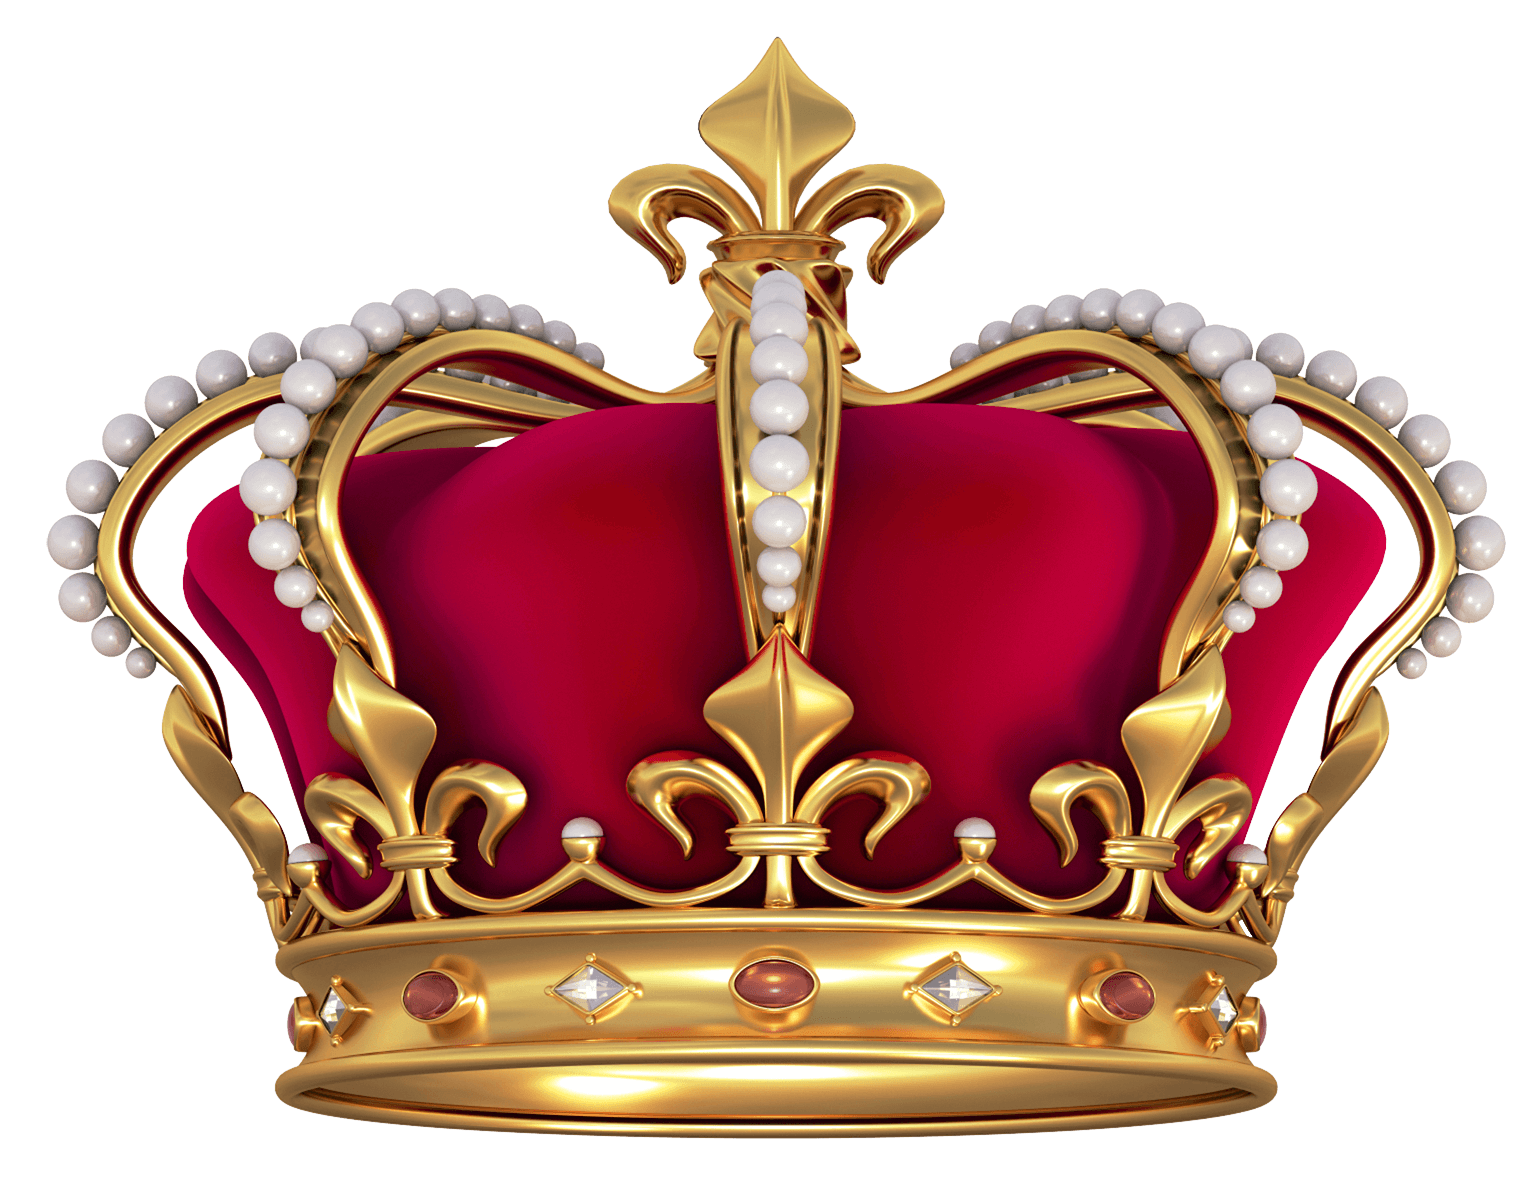 Red and Gold Crown Logo - Crown him with many crowns clip art royalty free stock